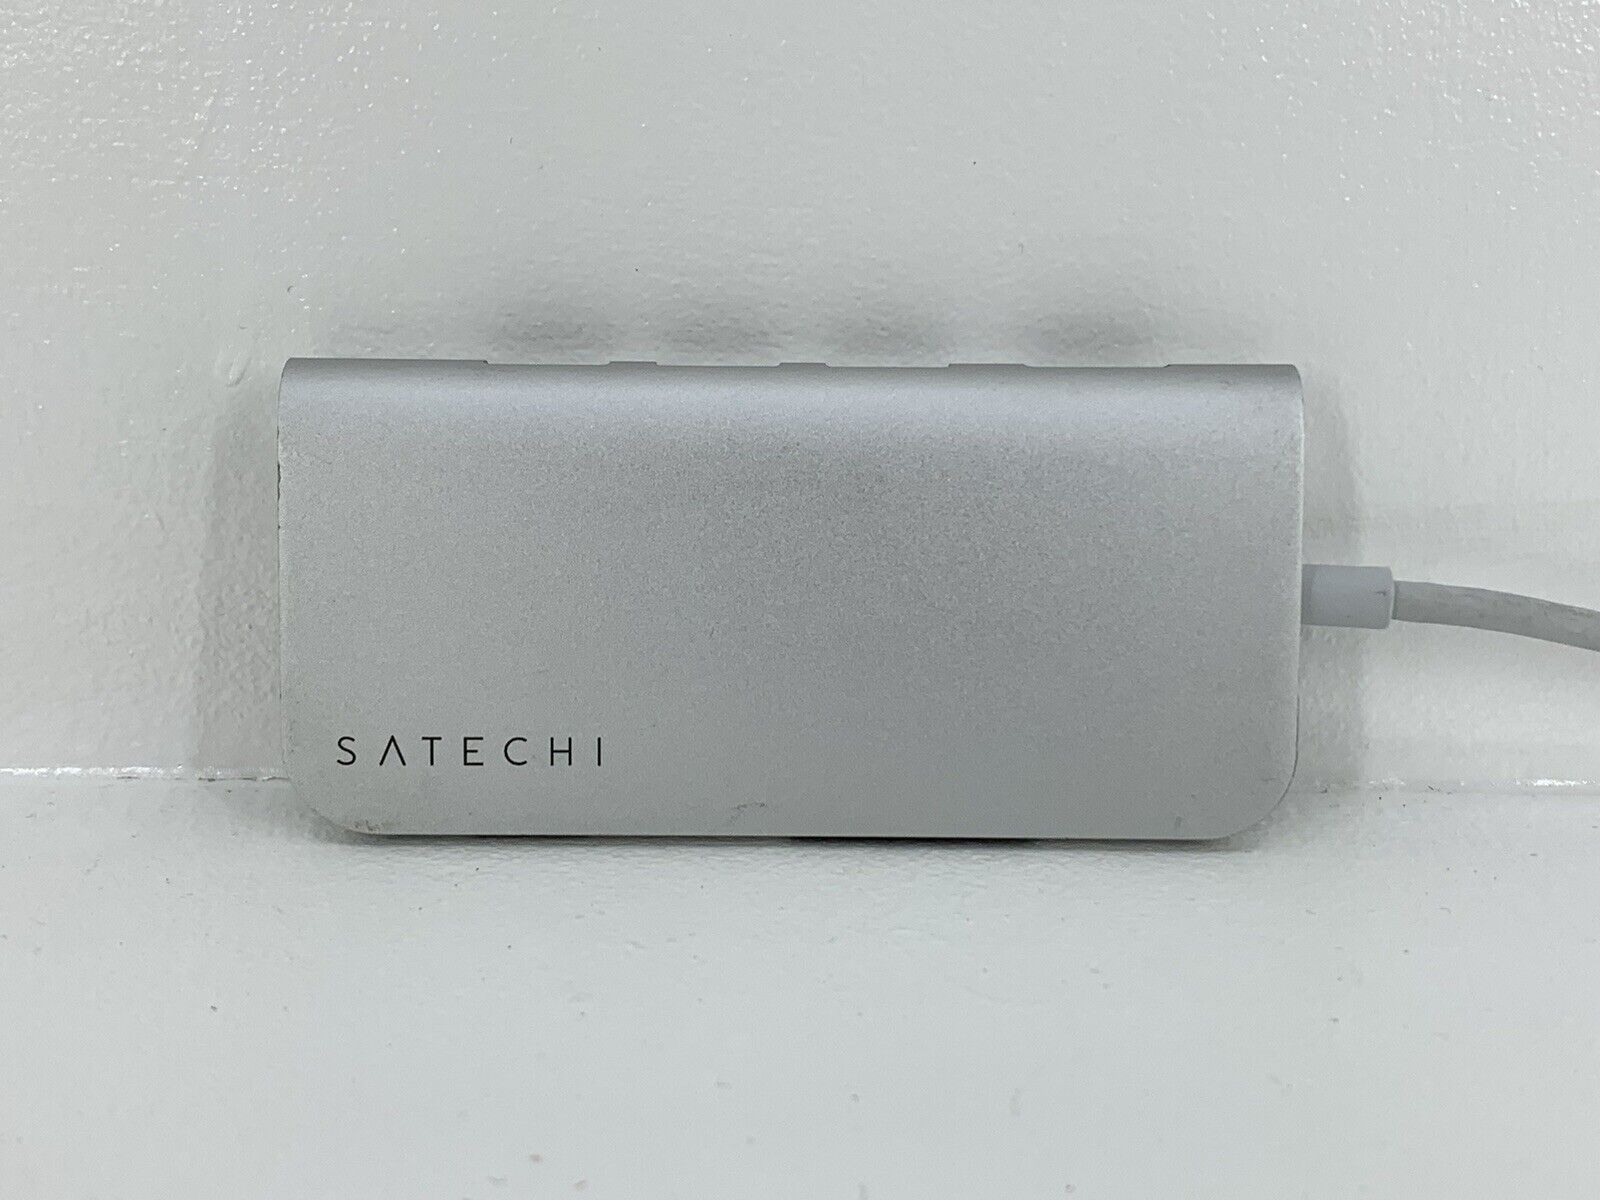 Satechi USB Type-C Multi-Port Adapter with 4K HDMI and Ethernet V2, Silver. M